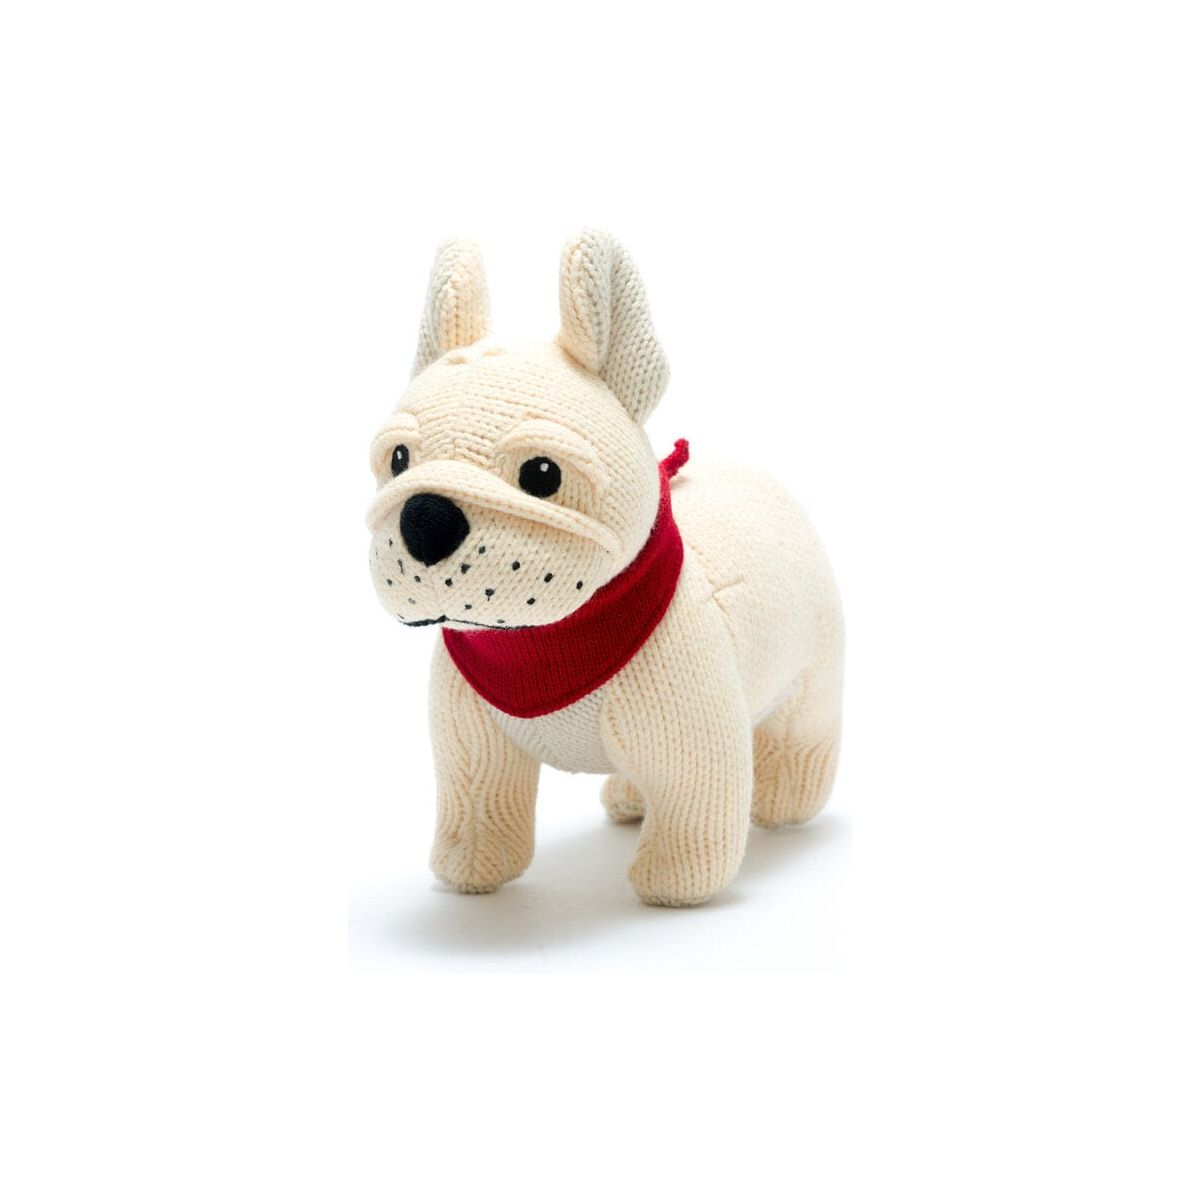 Best Years Ltd Knitted French Bulldog Rattle